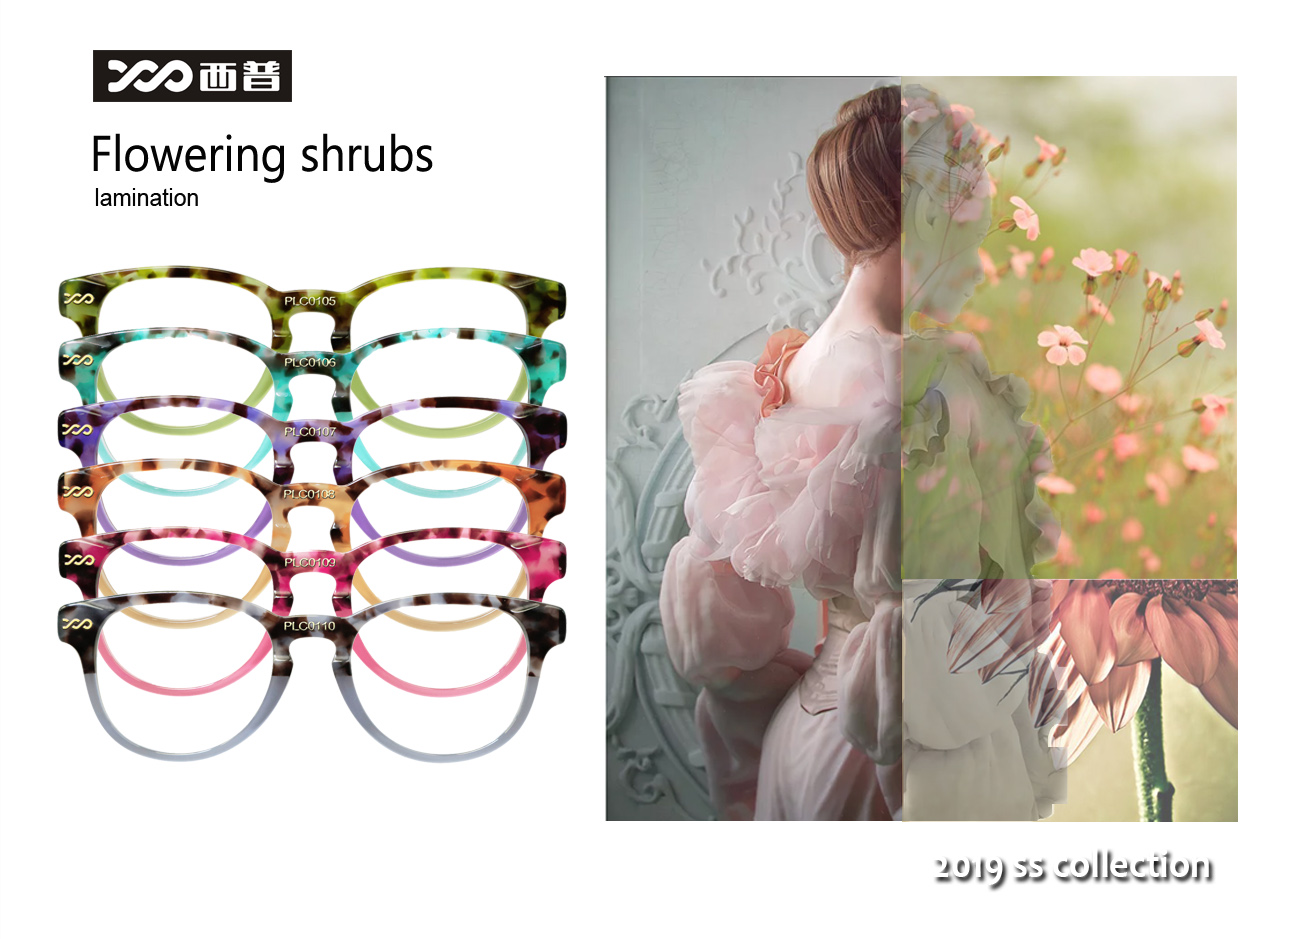 2019SS collection of flowering shrubs